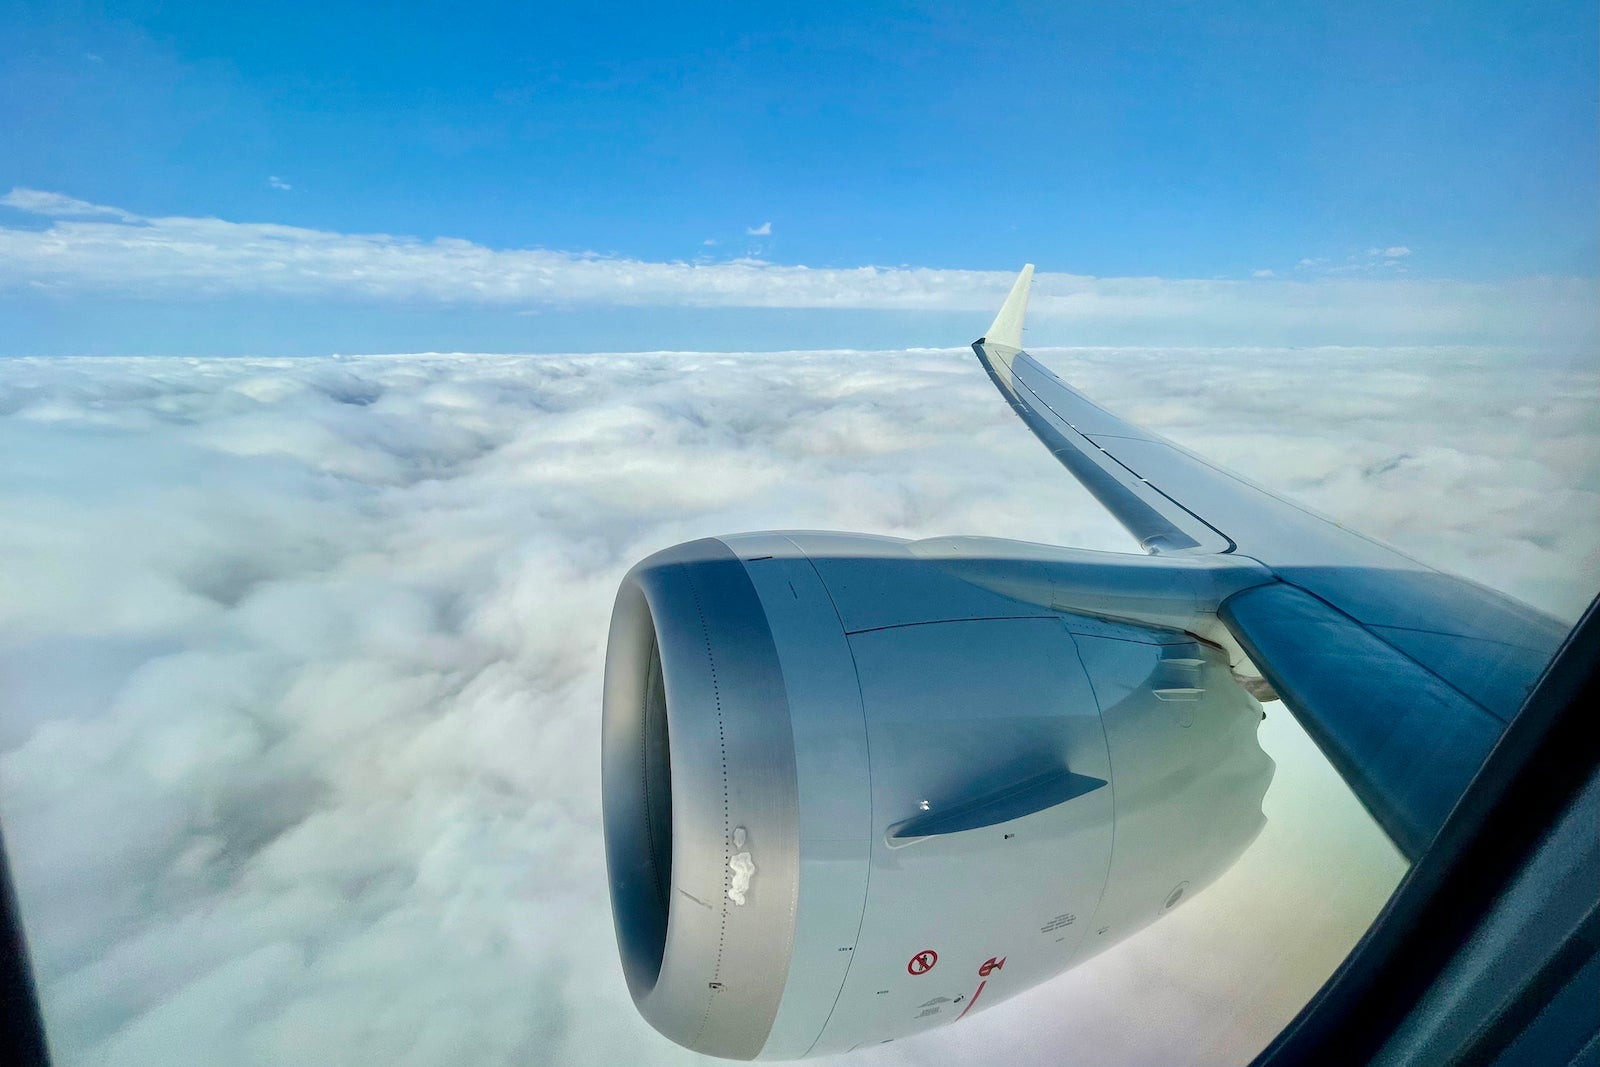 View of a plane wing and engine above a cloudy blue sky mid-flight